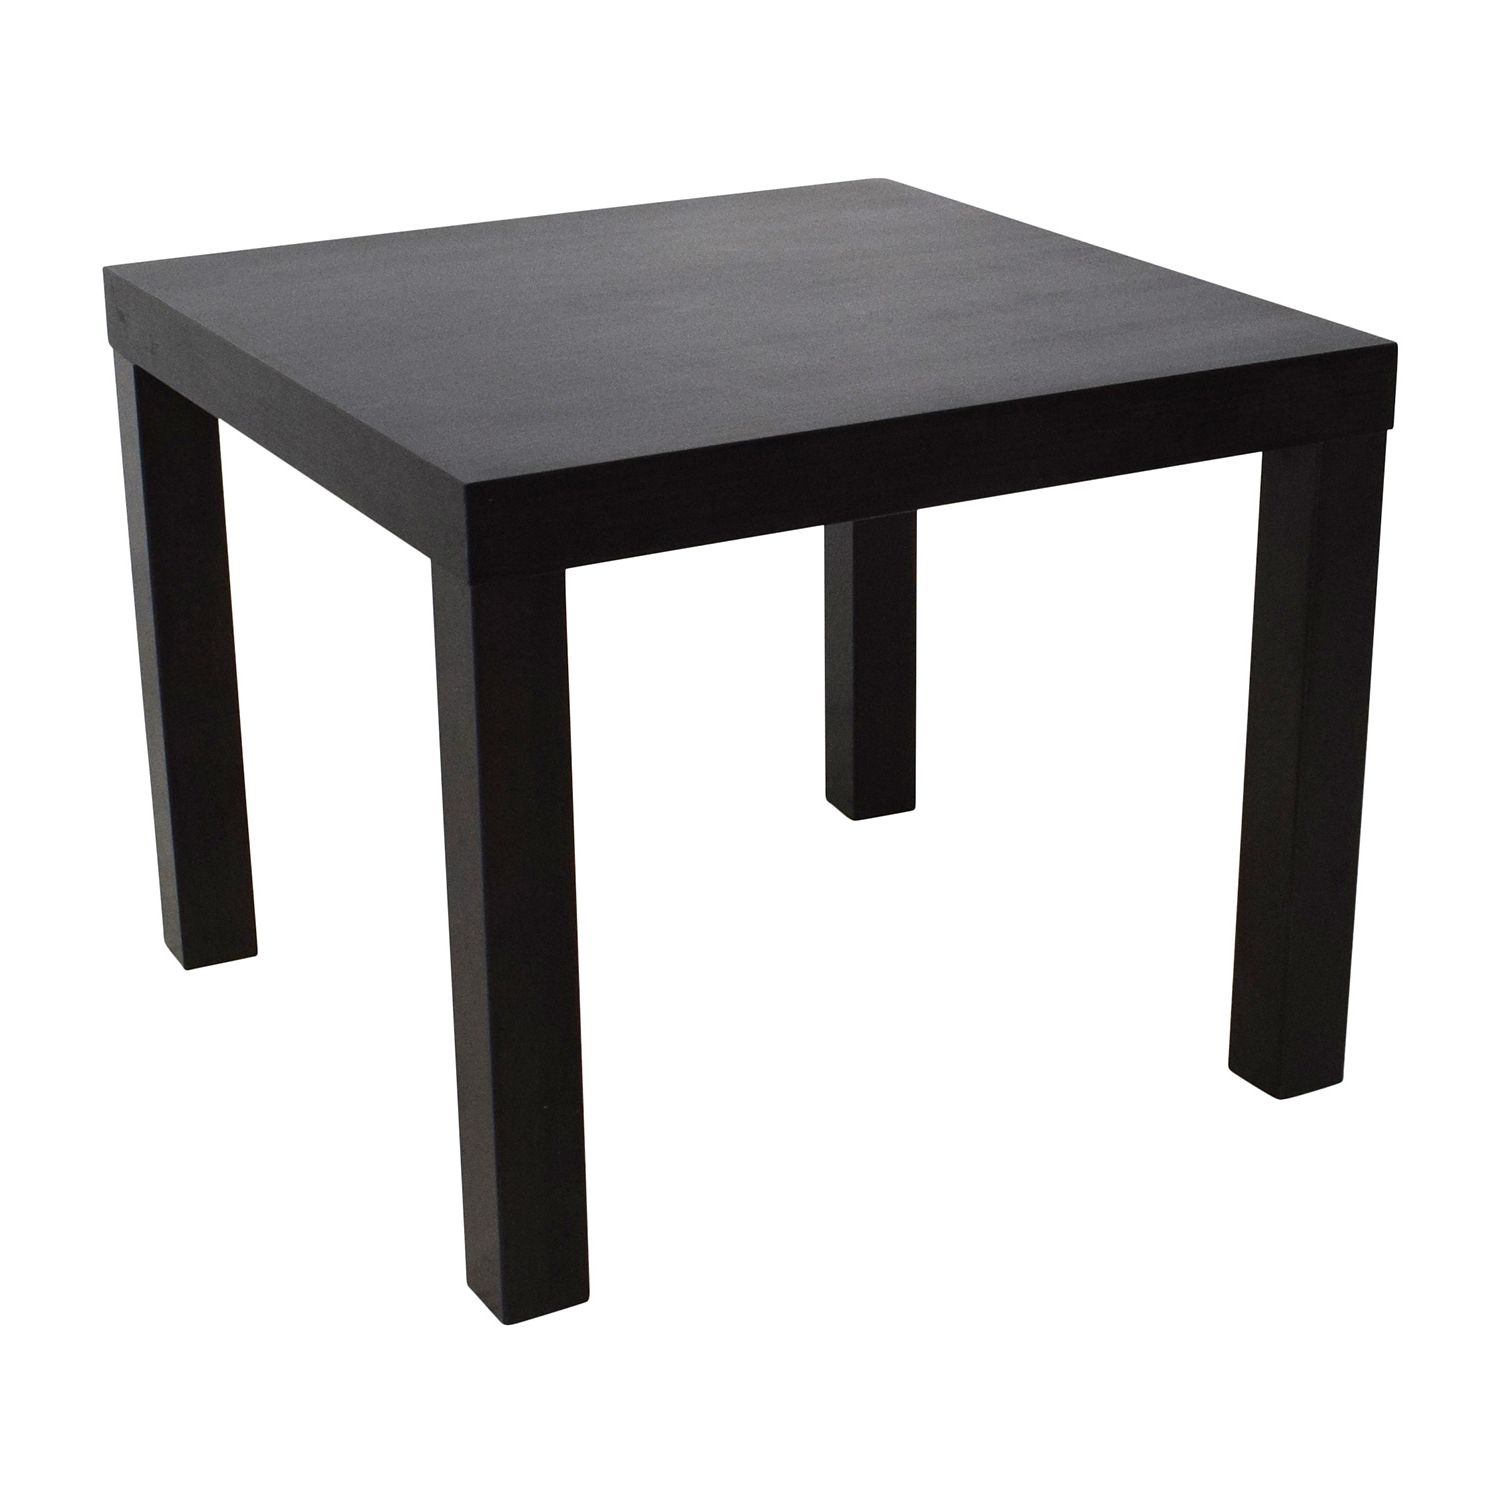 [%popular Black And White Coffee Tables In 80% Off – Black Coffee Table / Tables|80% Off – Black Coffee Table / Tables Inside 2020 Black And White Coffee Tables%] (Gallery 14 of 20)